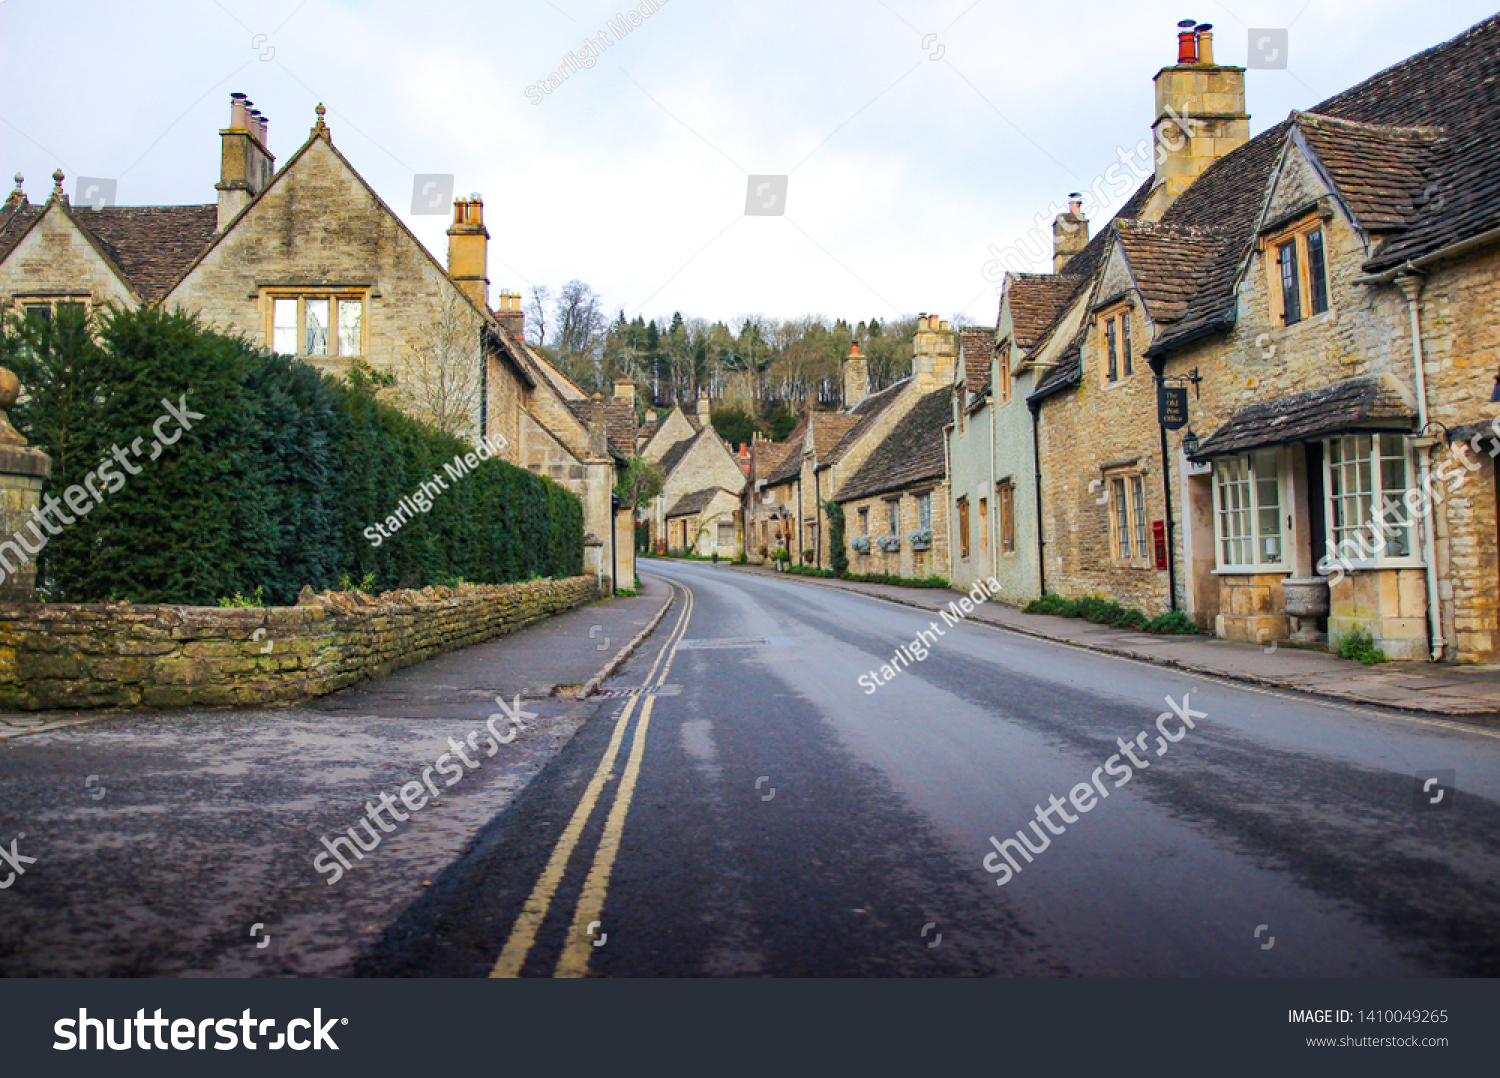 Small town in england with beautiful architecture. #1410049265